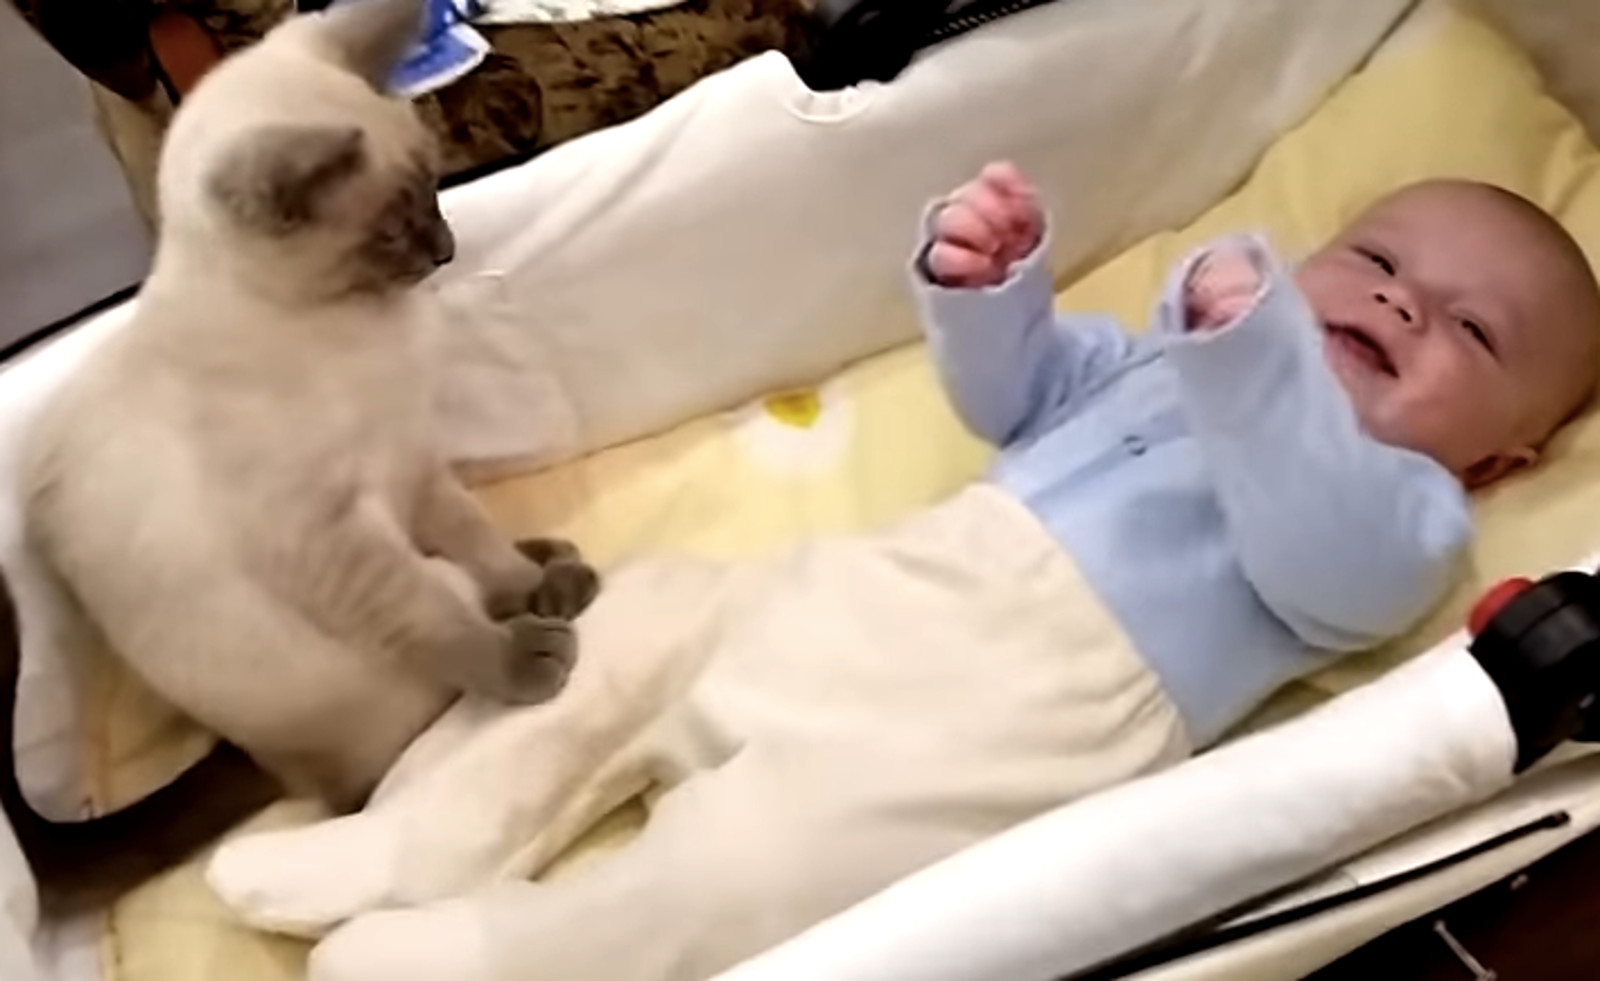 Patient Nanny Cat Attempts to Calm Baby 